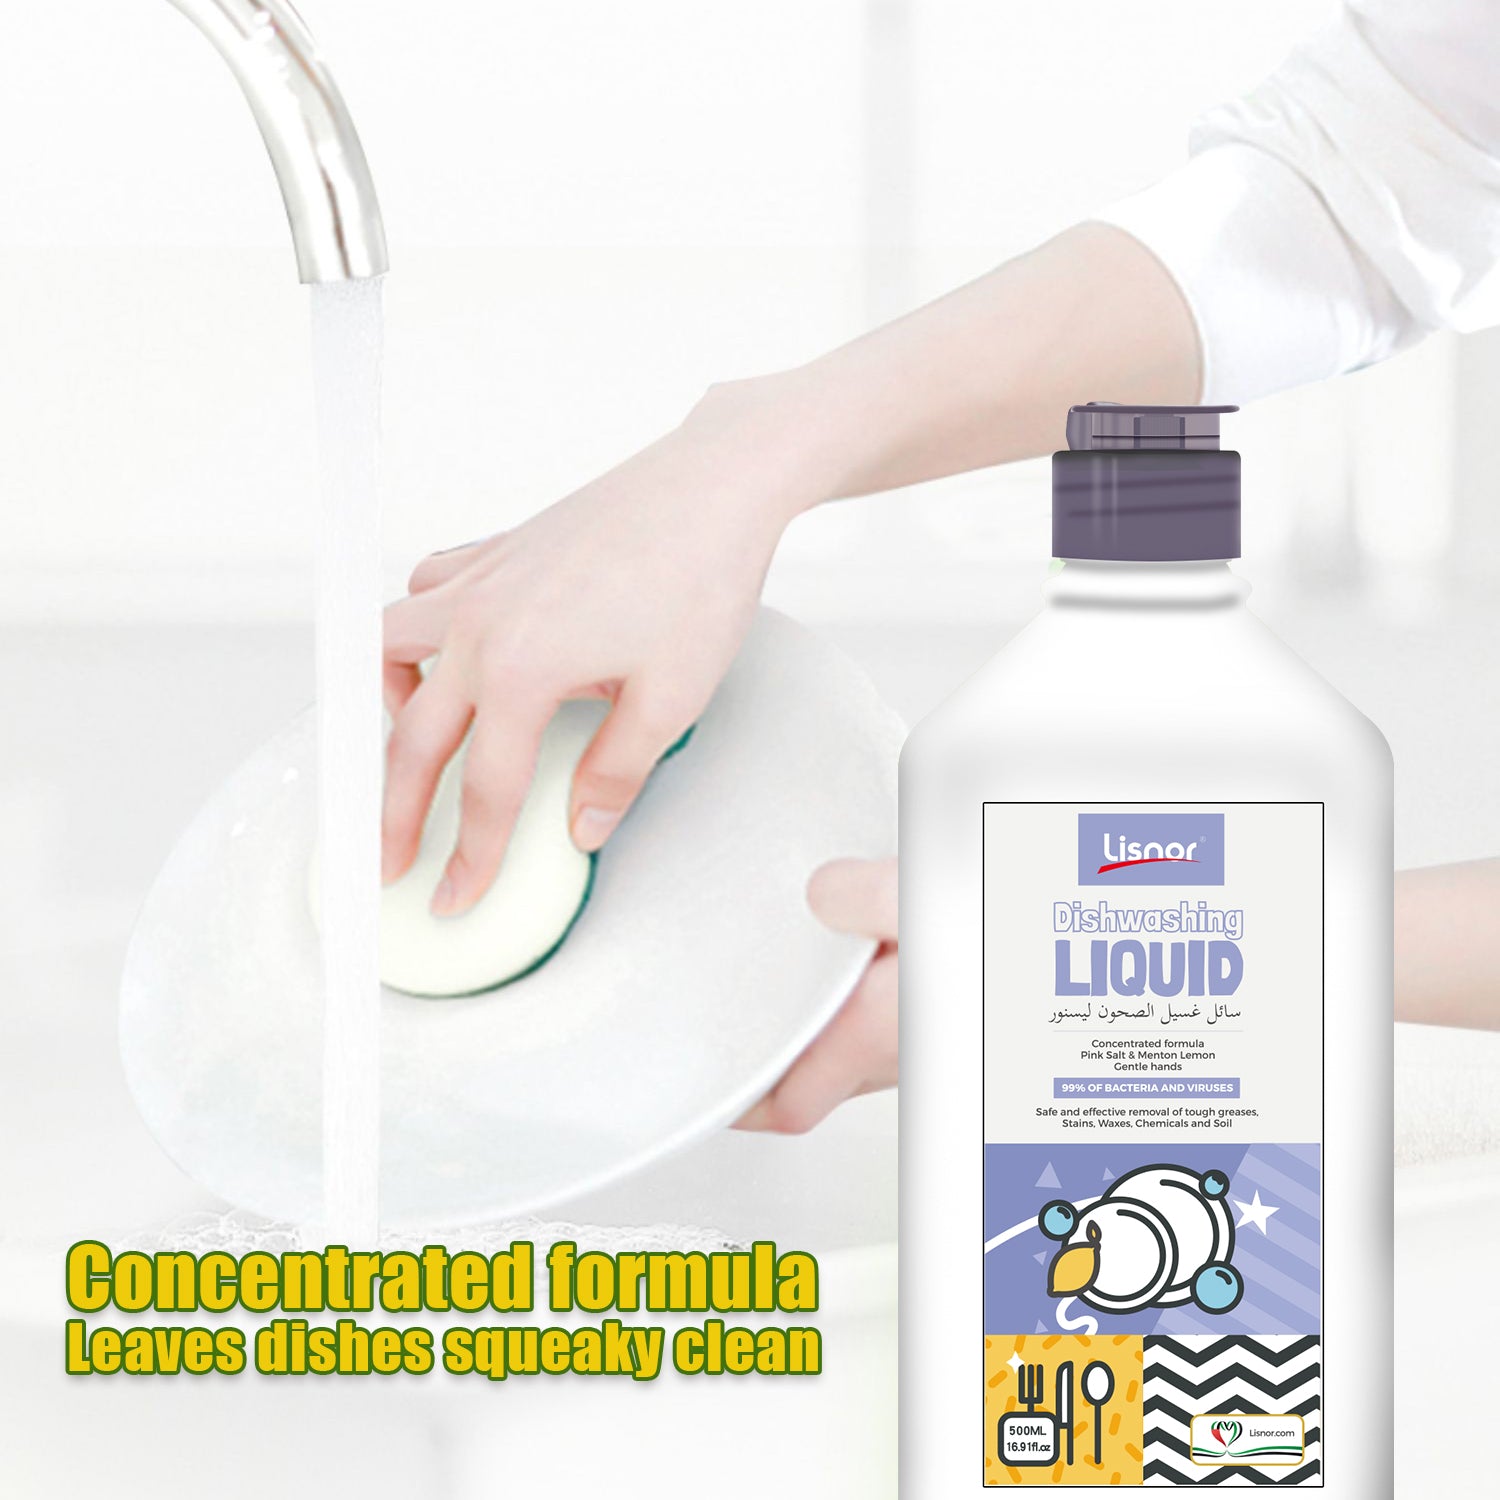 Dishwashing Liquid 500ml. Concentrated Formula Pink Salt & Menton Lemon. Gentle Hands. Safe and Effective removal of tough greases, Stains, Waxes, Chemicals and Soils.